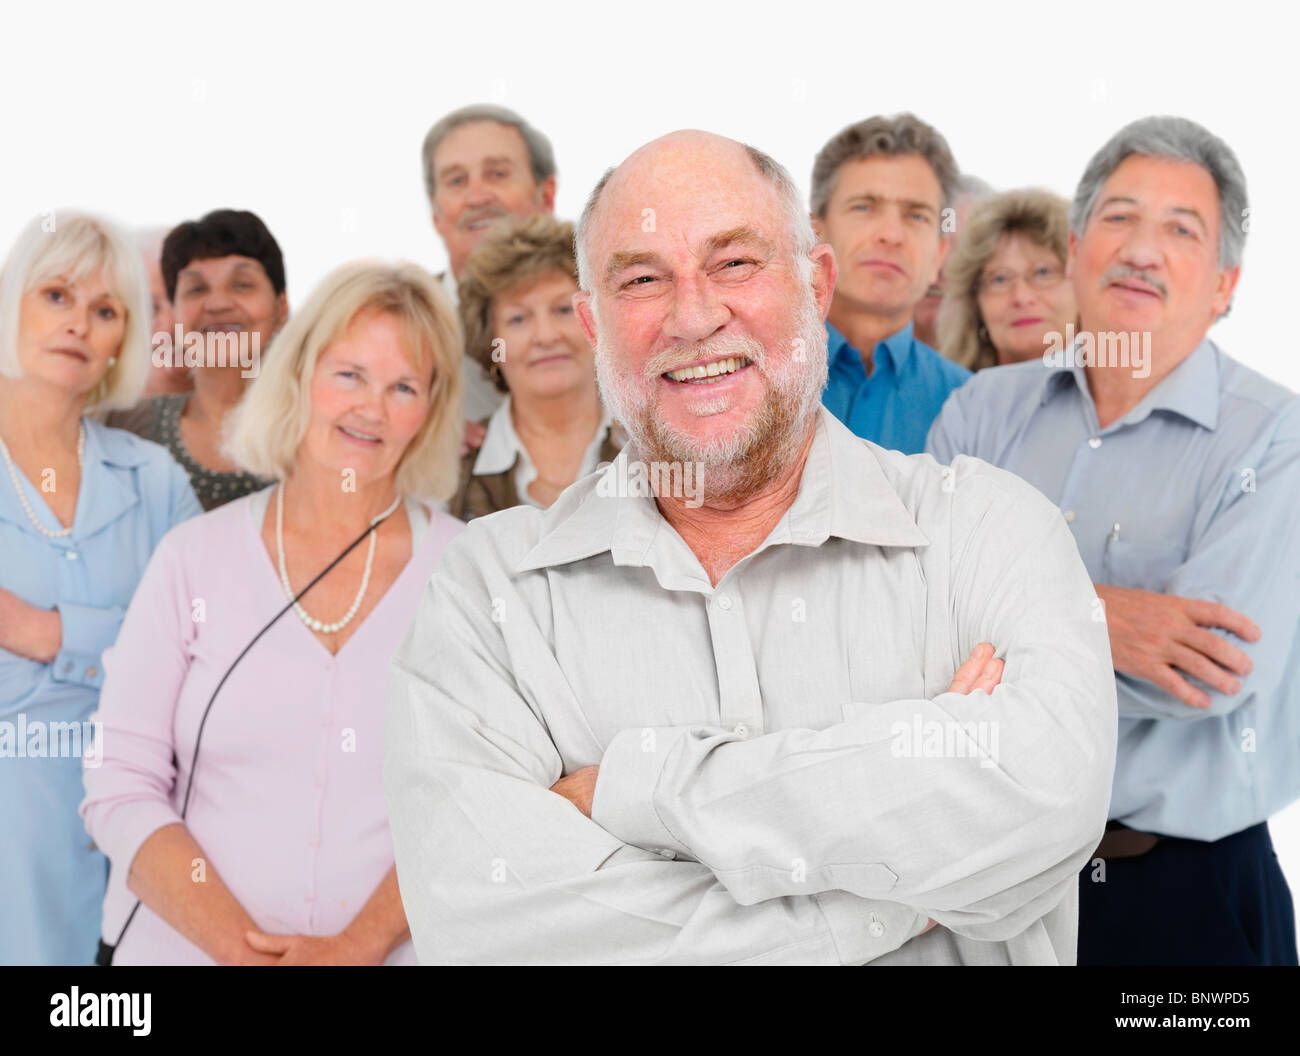 A group of diverse people Stock Photo